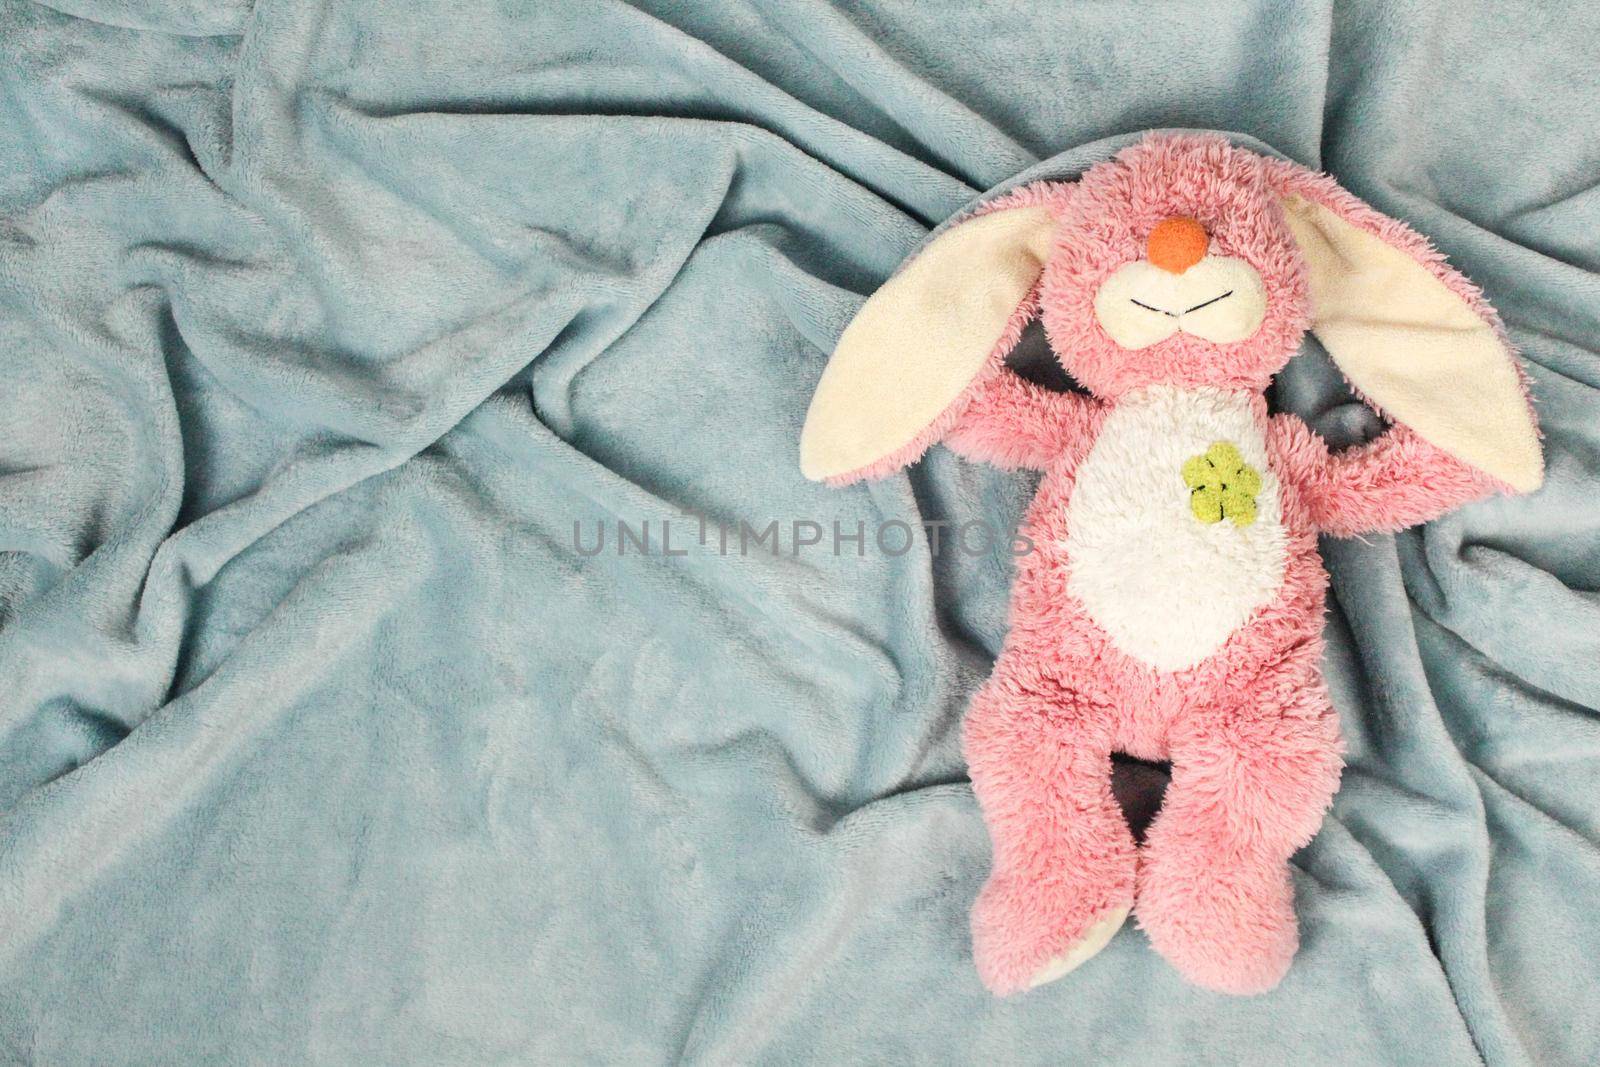 A plush toy sitting on plush blanket. Plush pink bunny toy with green flower. by JuliaDorian